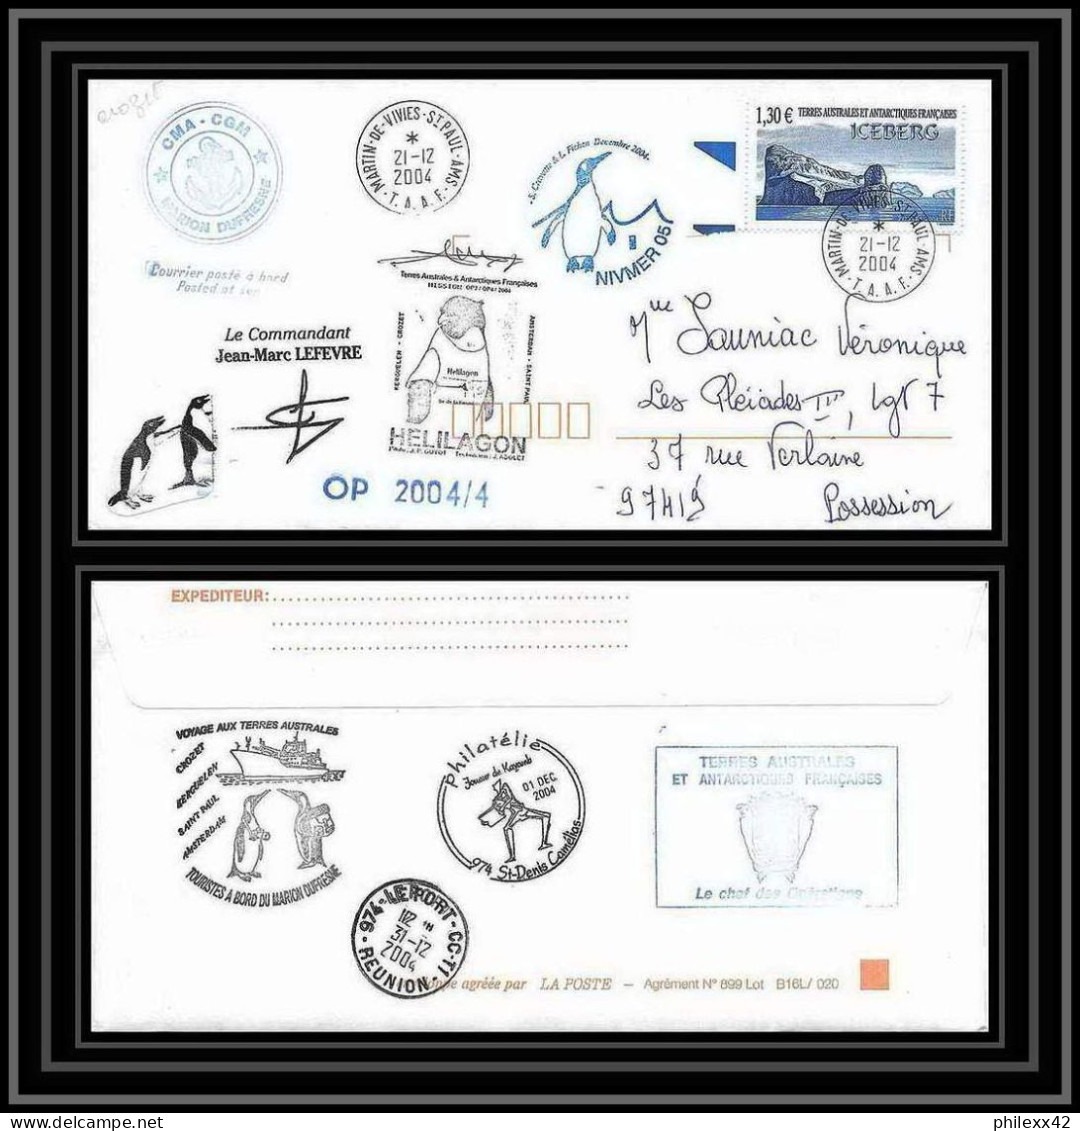 2485 ANTARCTIC Terres Australes TAAF Lettre Cover Dufresne 2 Signé Signed OP 2004/4 N°387 21/12/2004 Helilagon - Helicopters